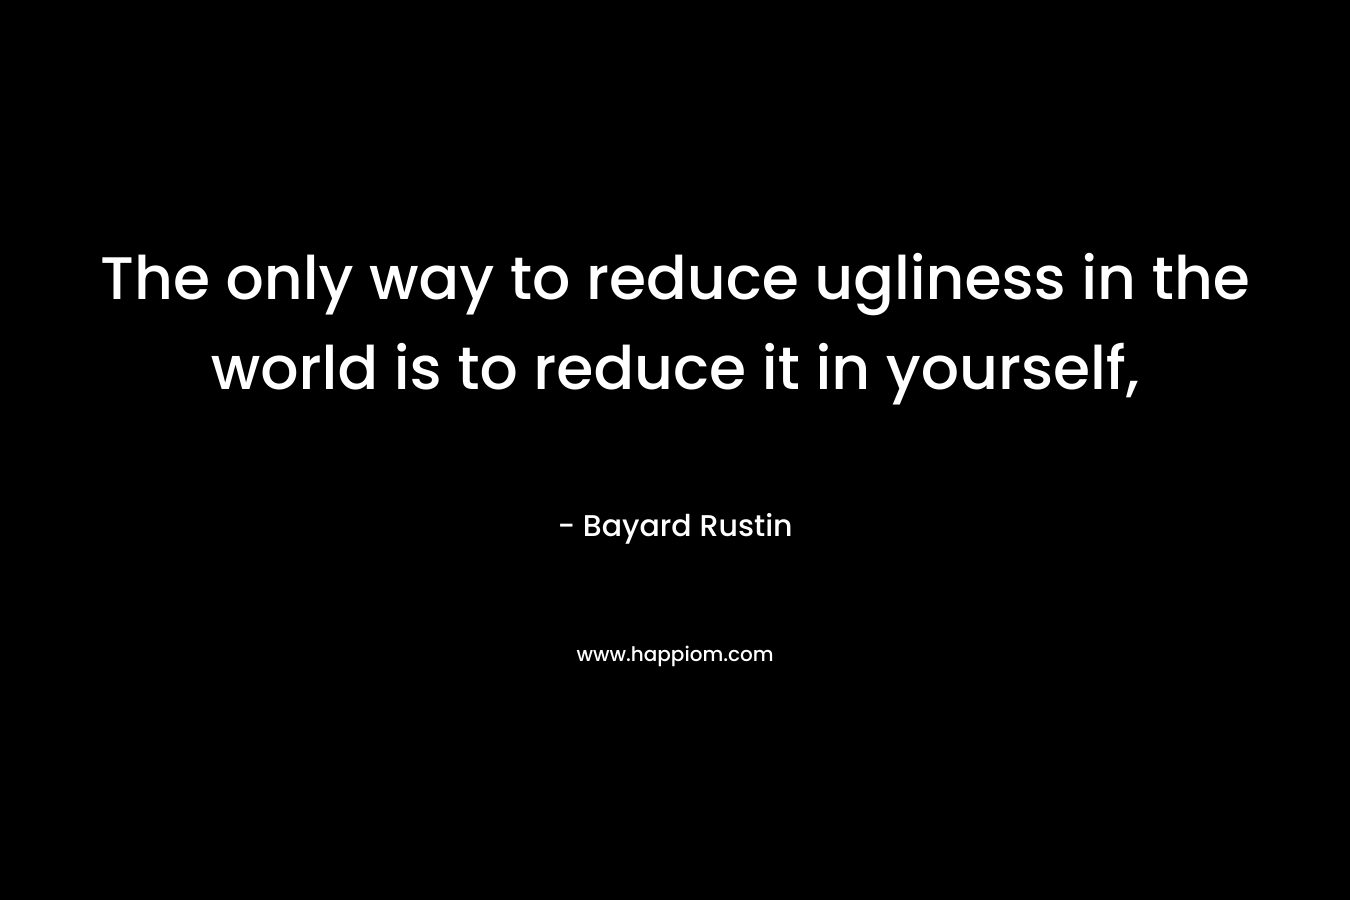 The only way to reduce ugliness in the world is to reduce it in yourself, – Bayard Rustin